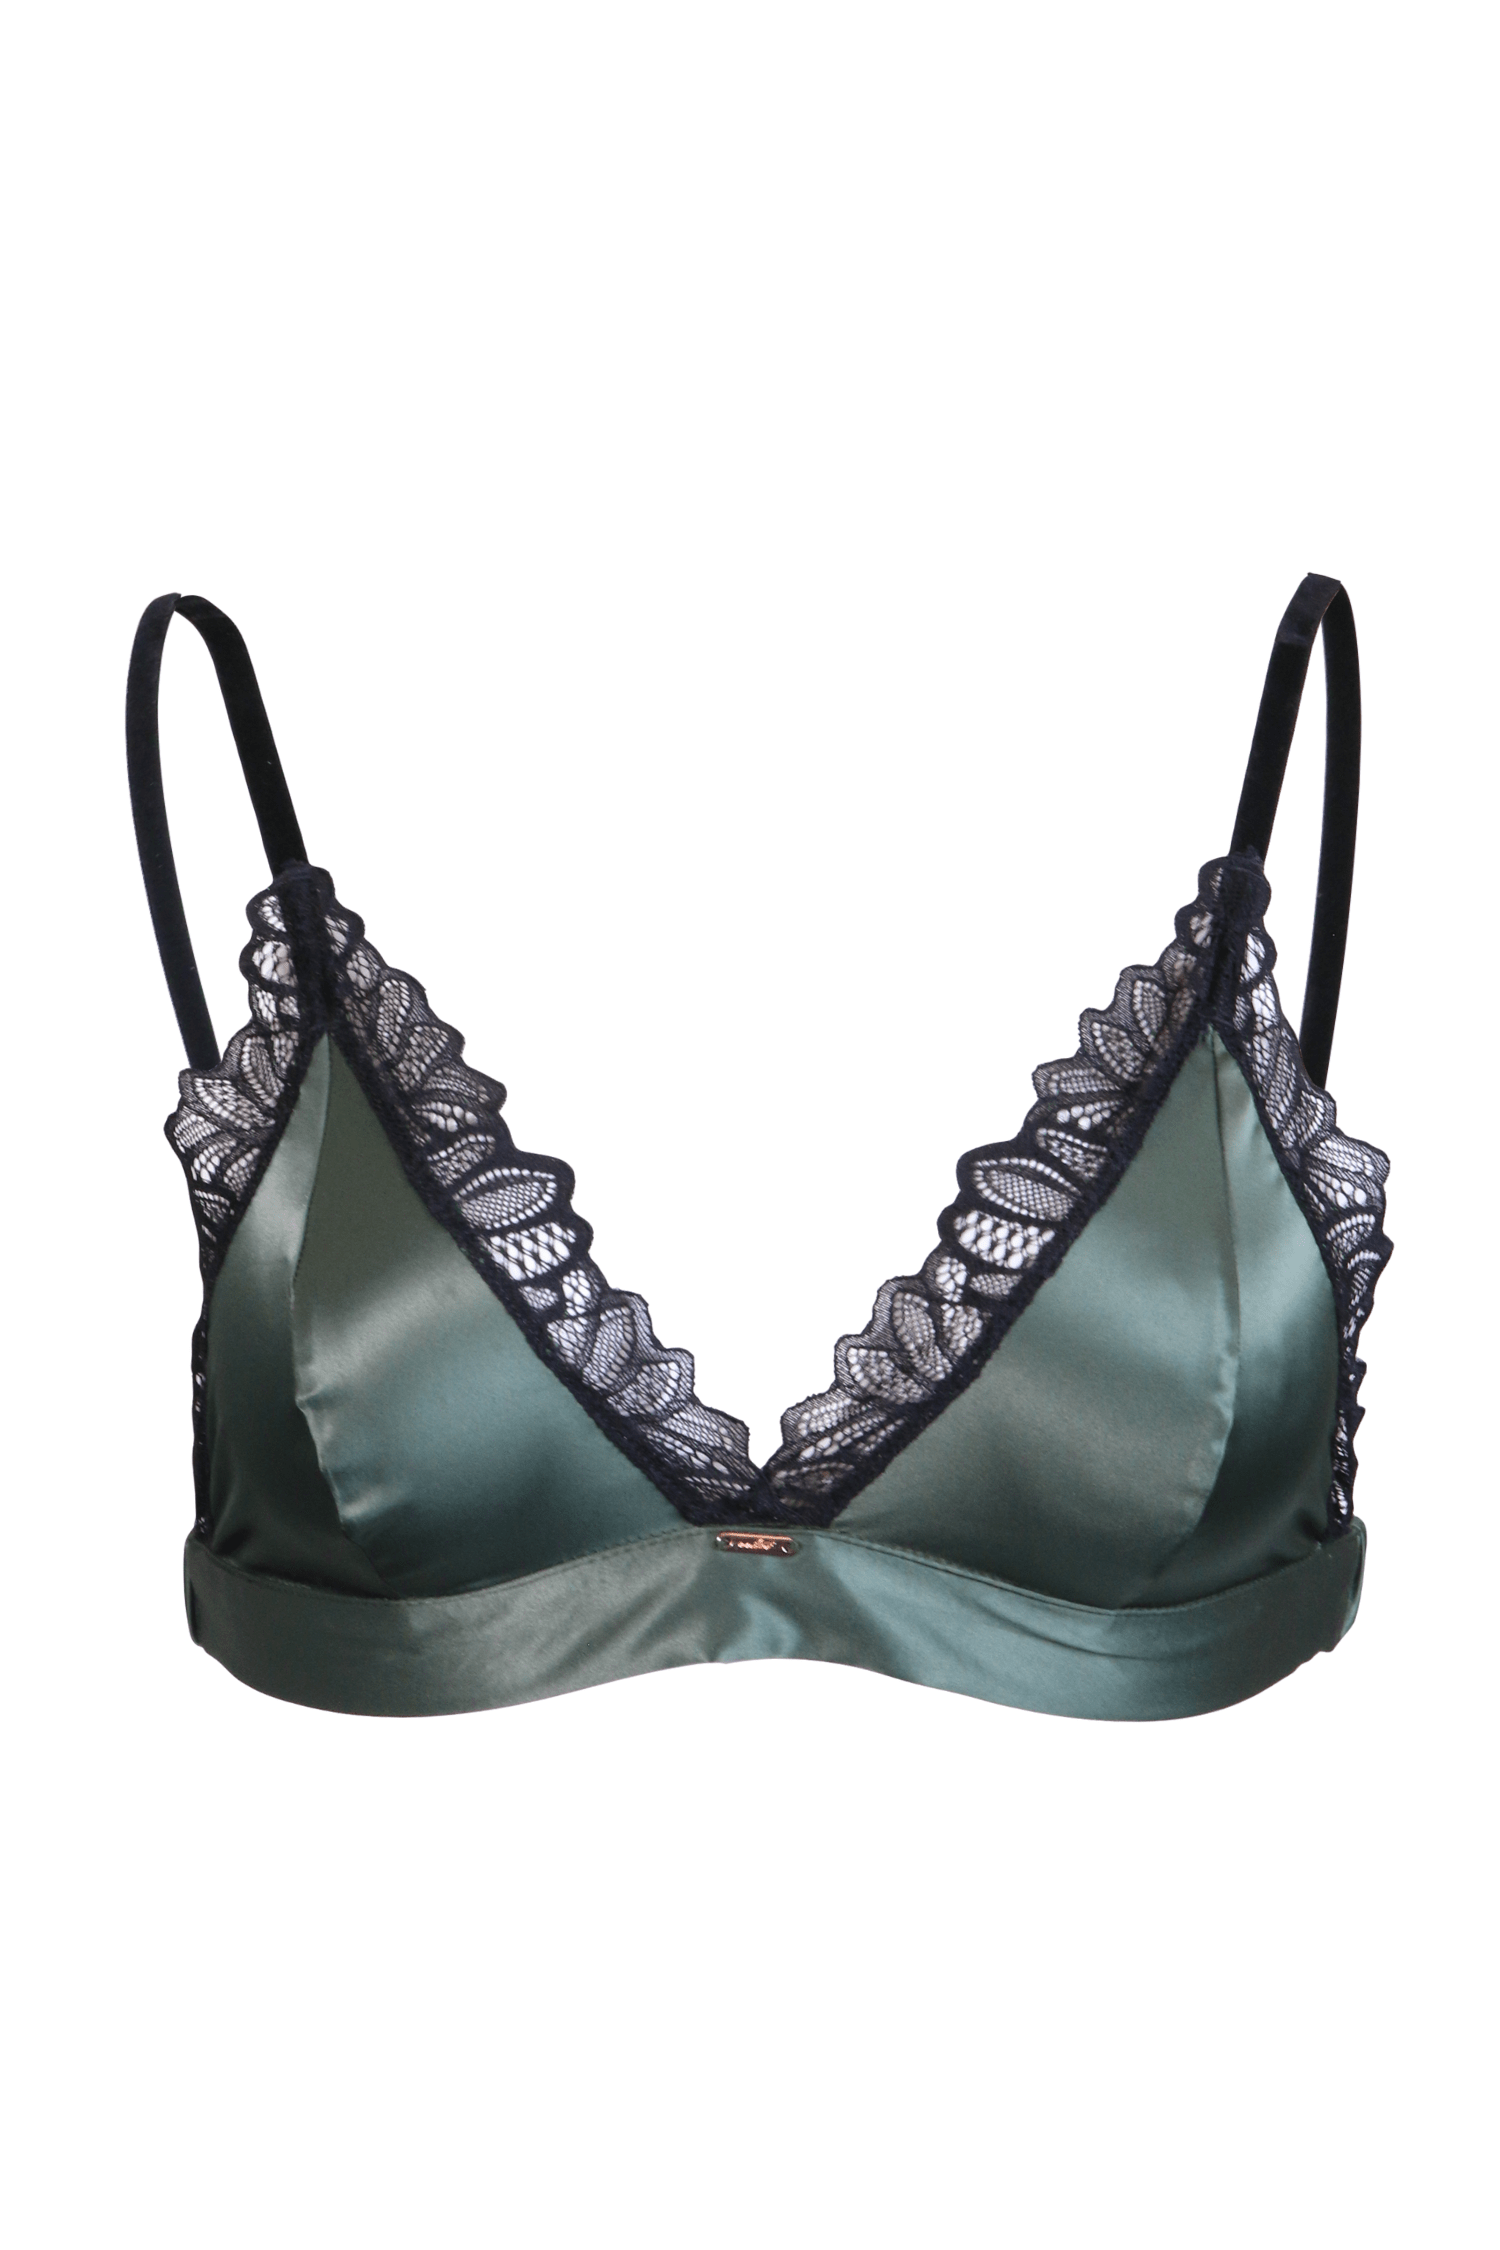 COSABELLA - FREE EXPRESS SHIPPING -Never Say Never Curvy Sweetie Bralette-  Ghana Green